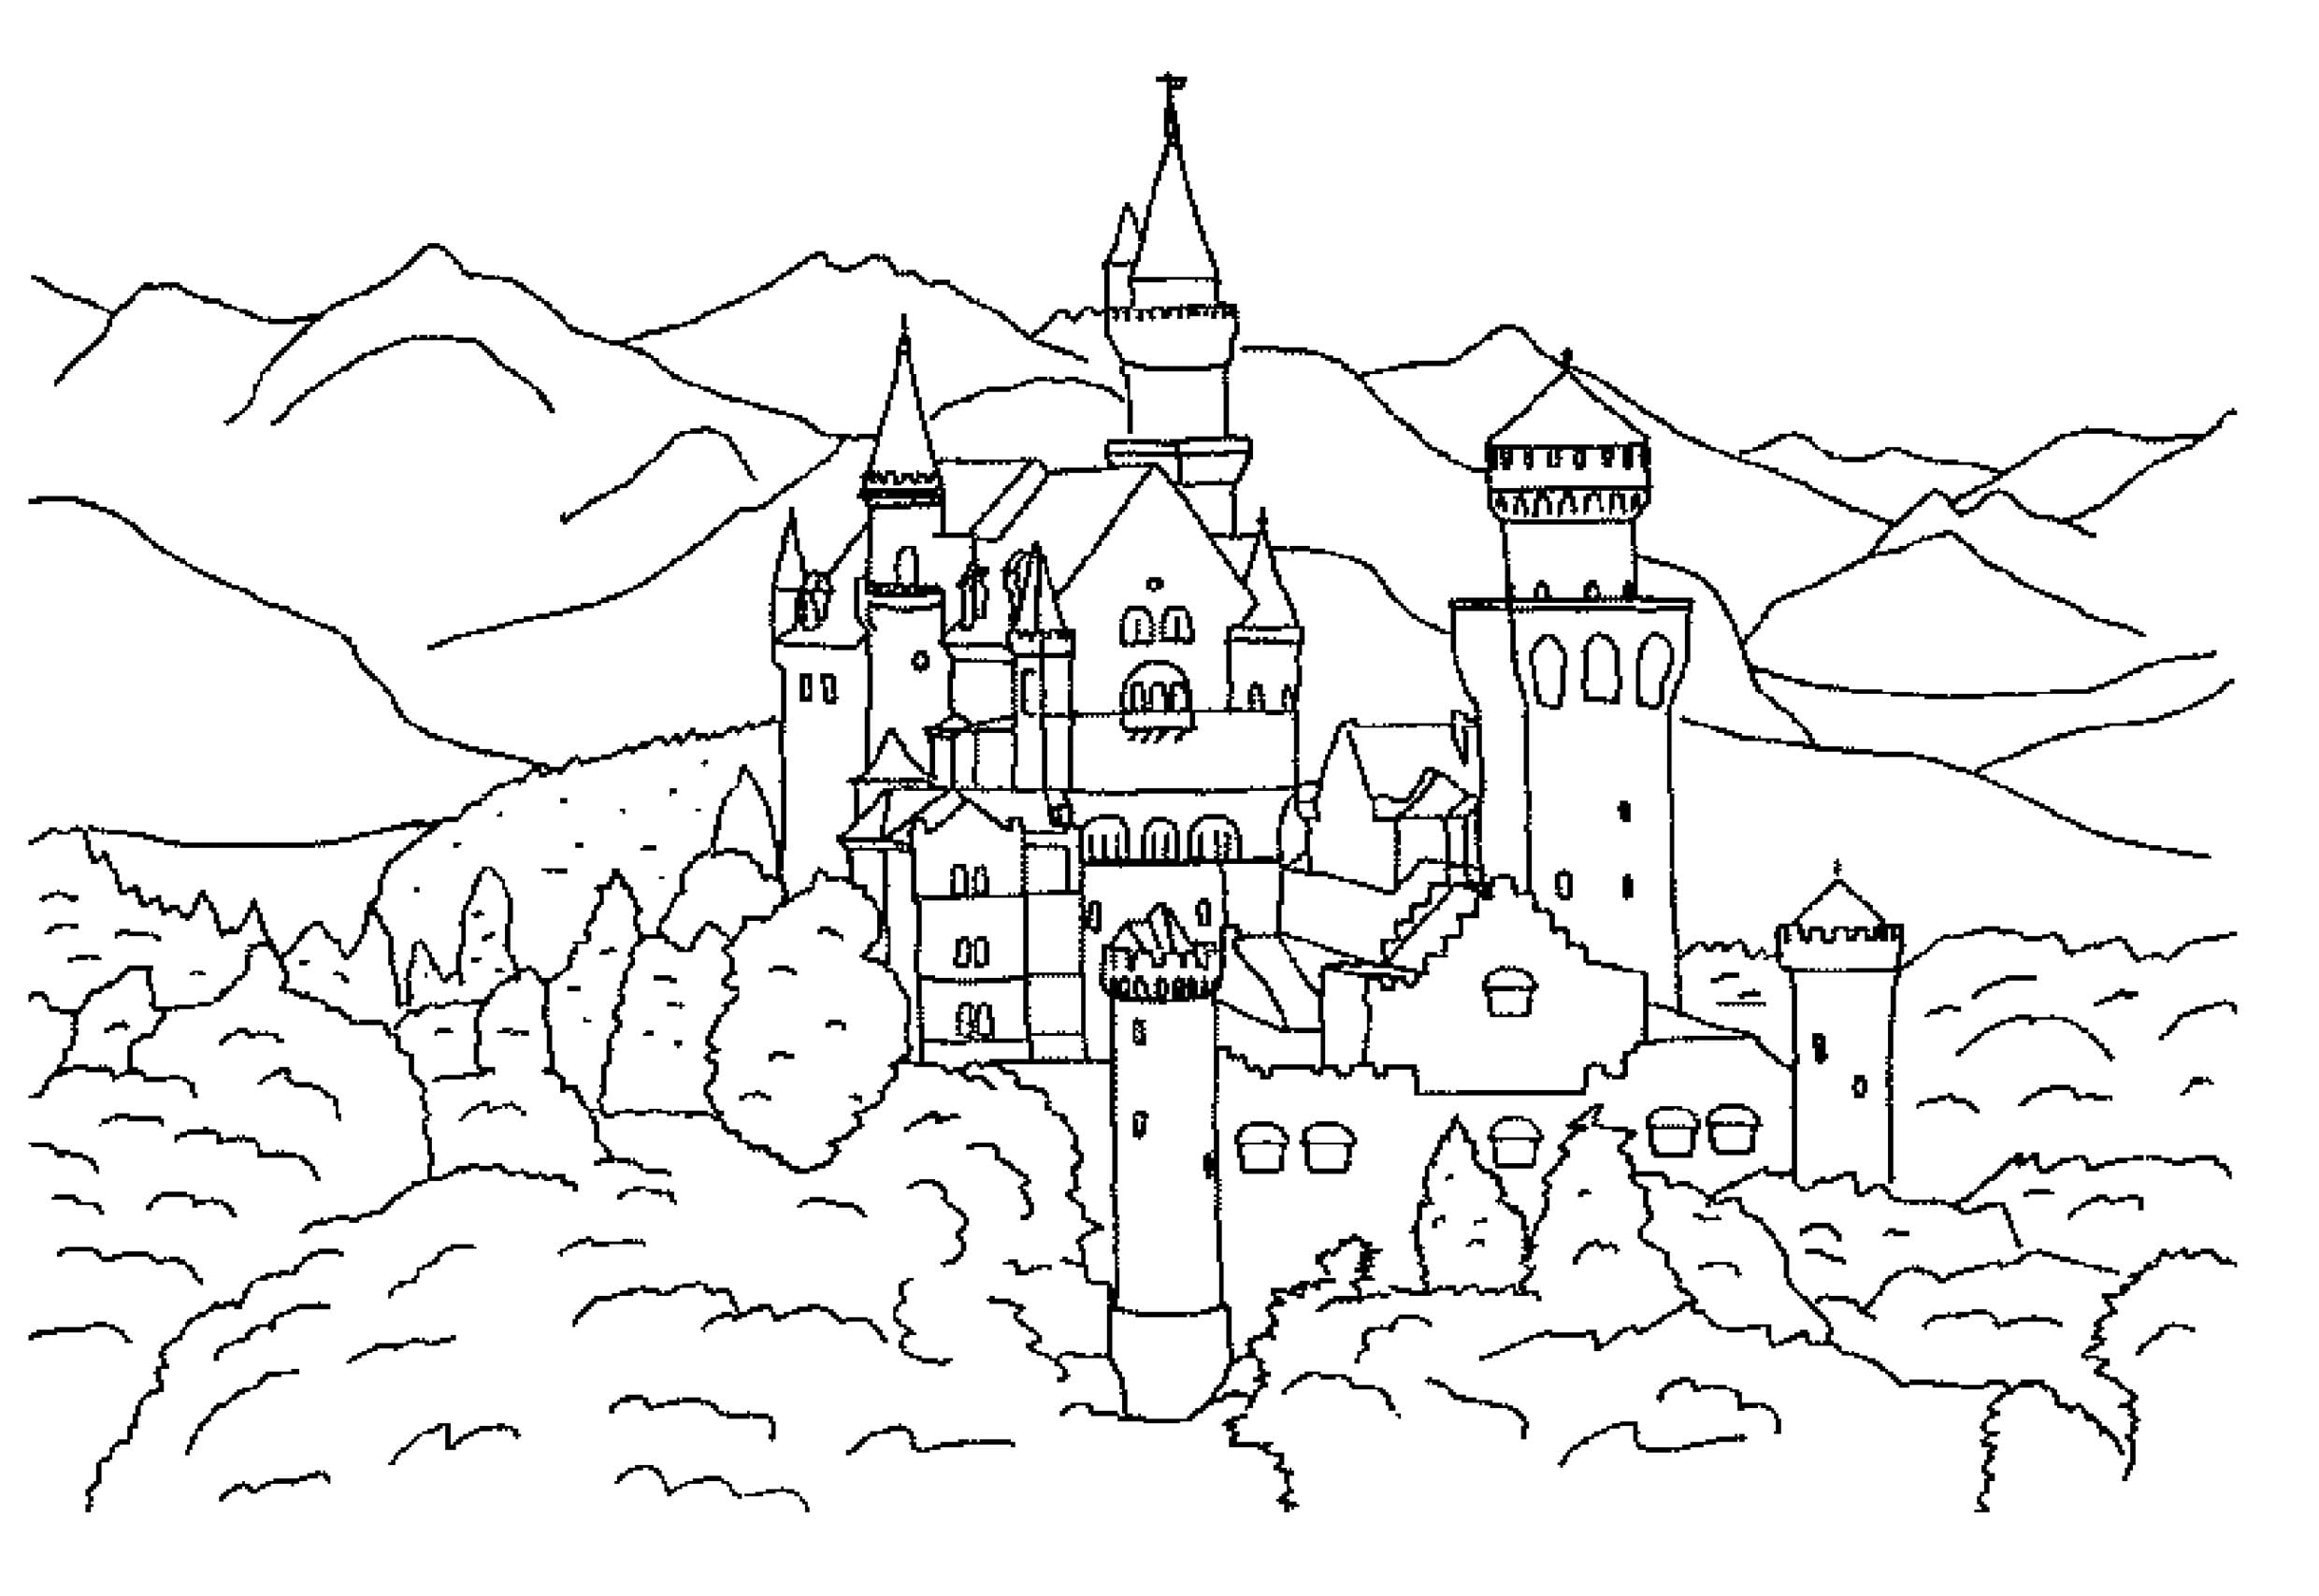 Castle in the mountains